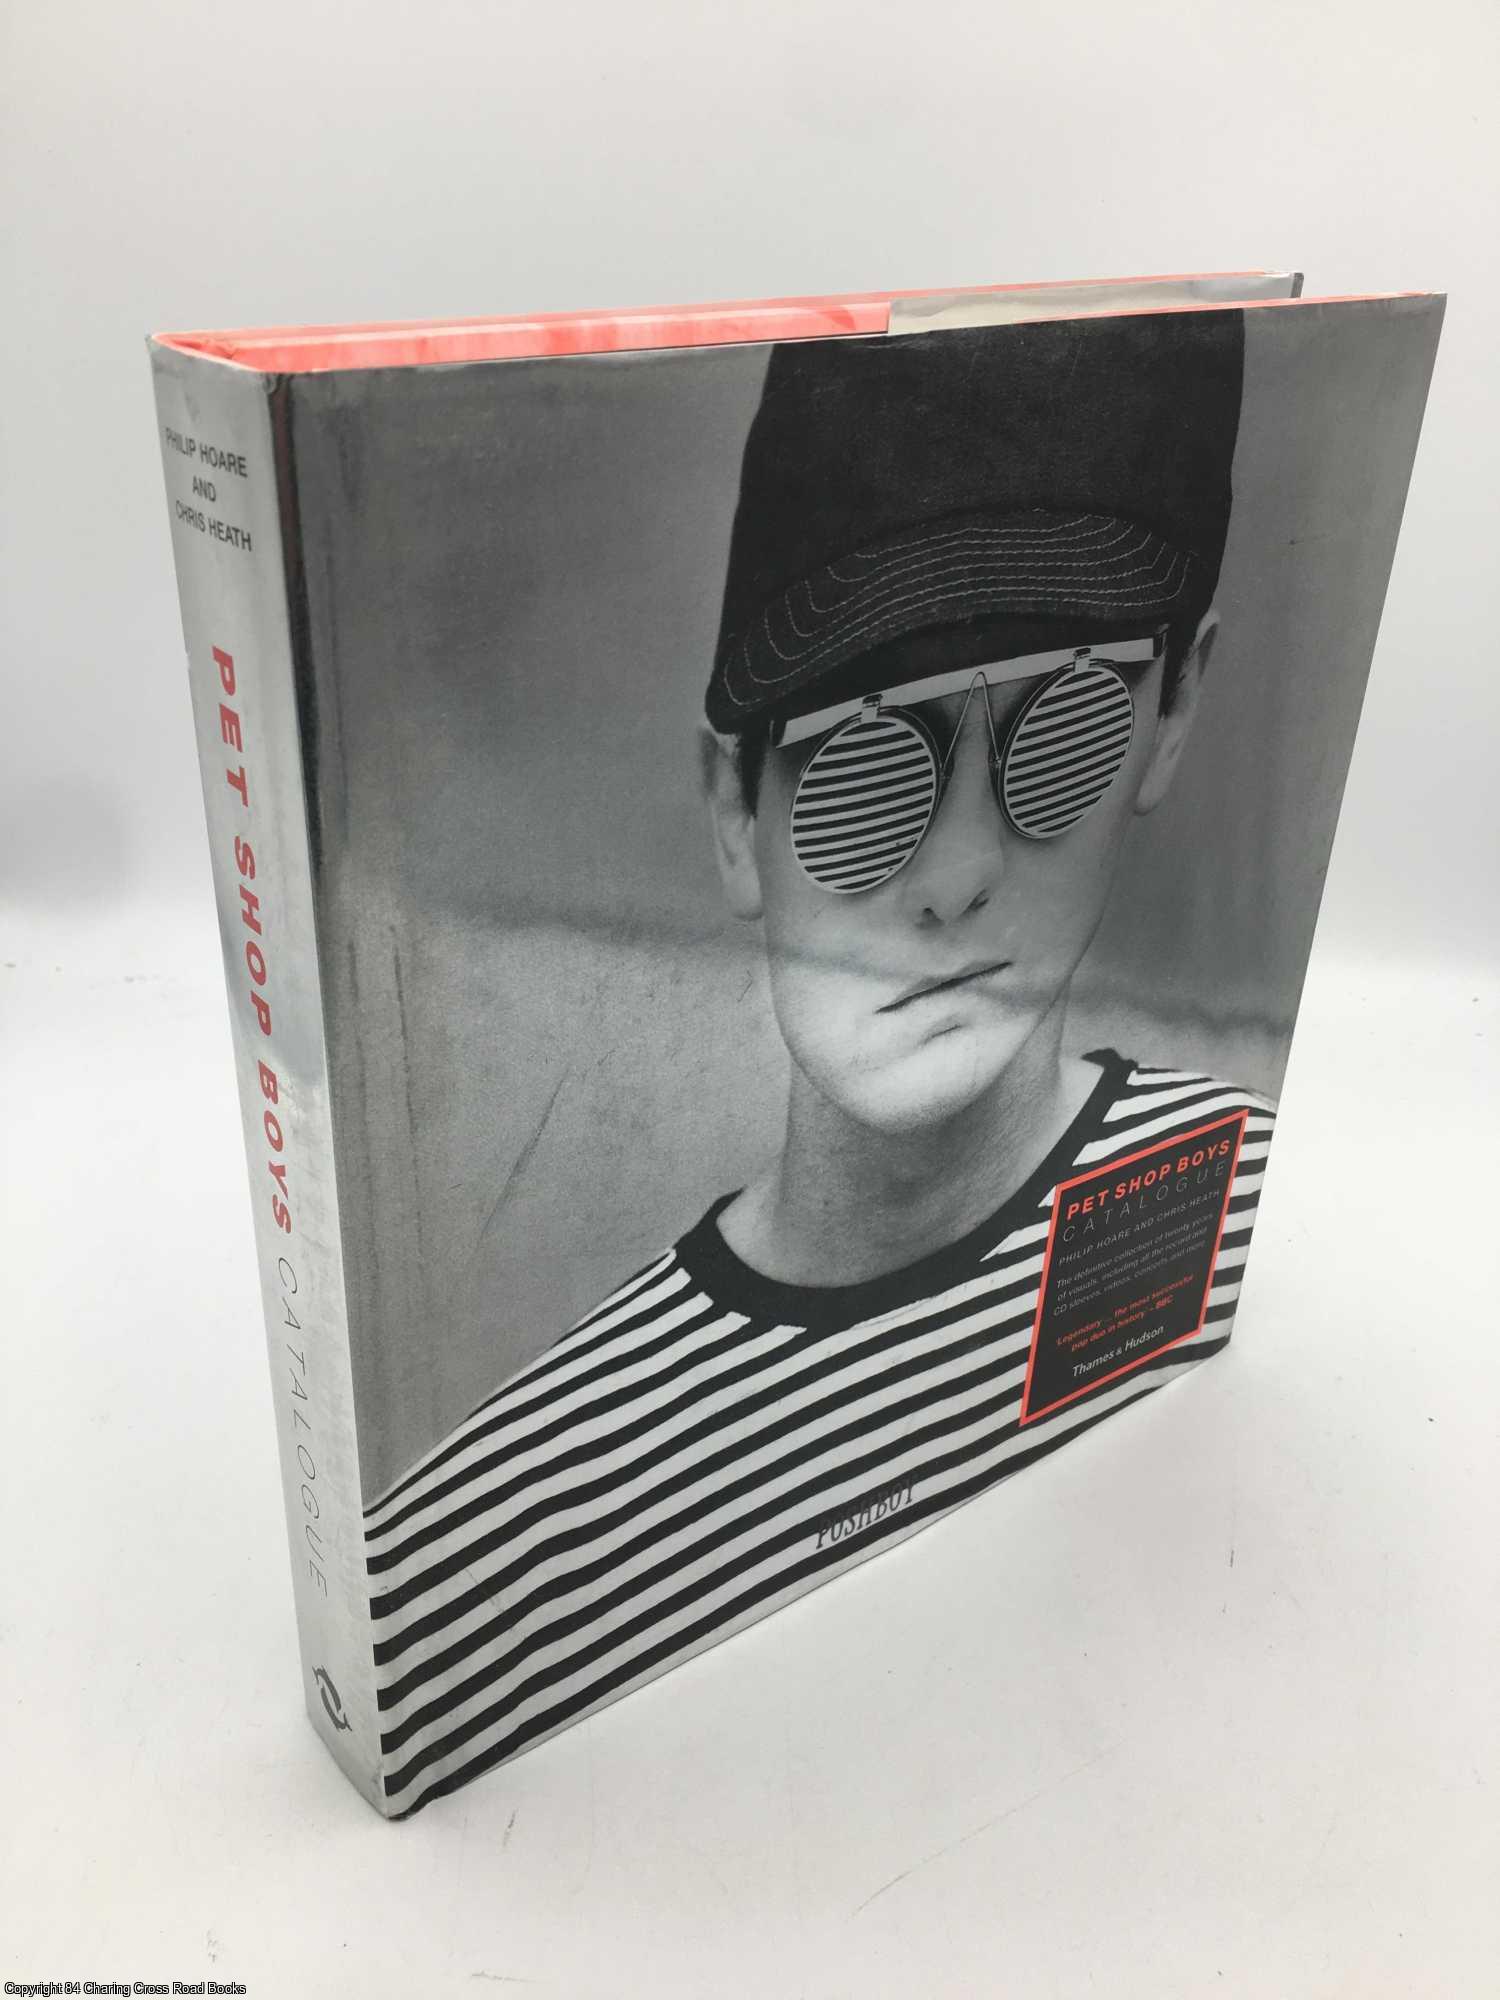 Pet Shop Boys Catalogue by Philip Hoare on 84 Charing Cross Rare Books